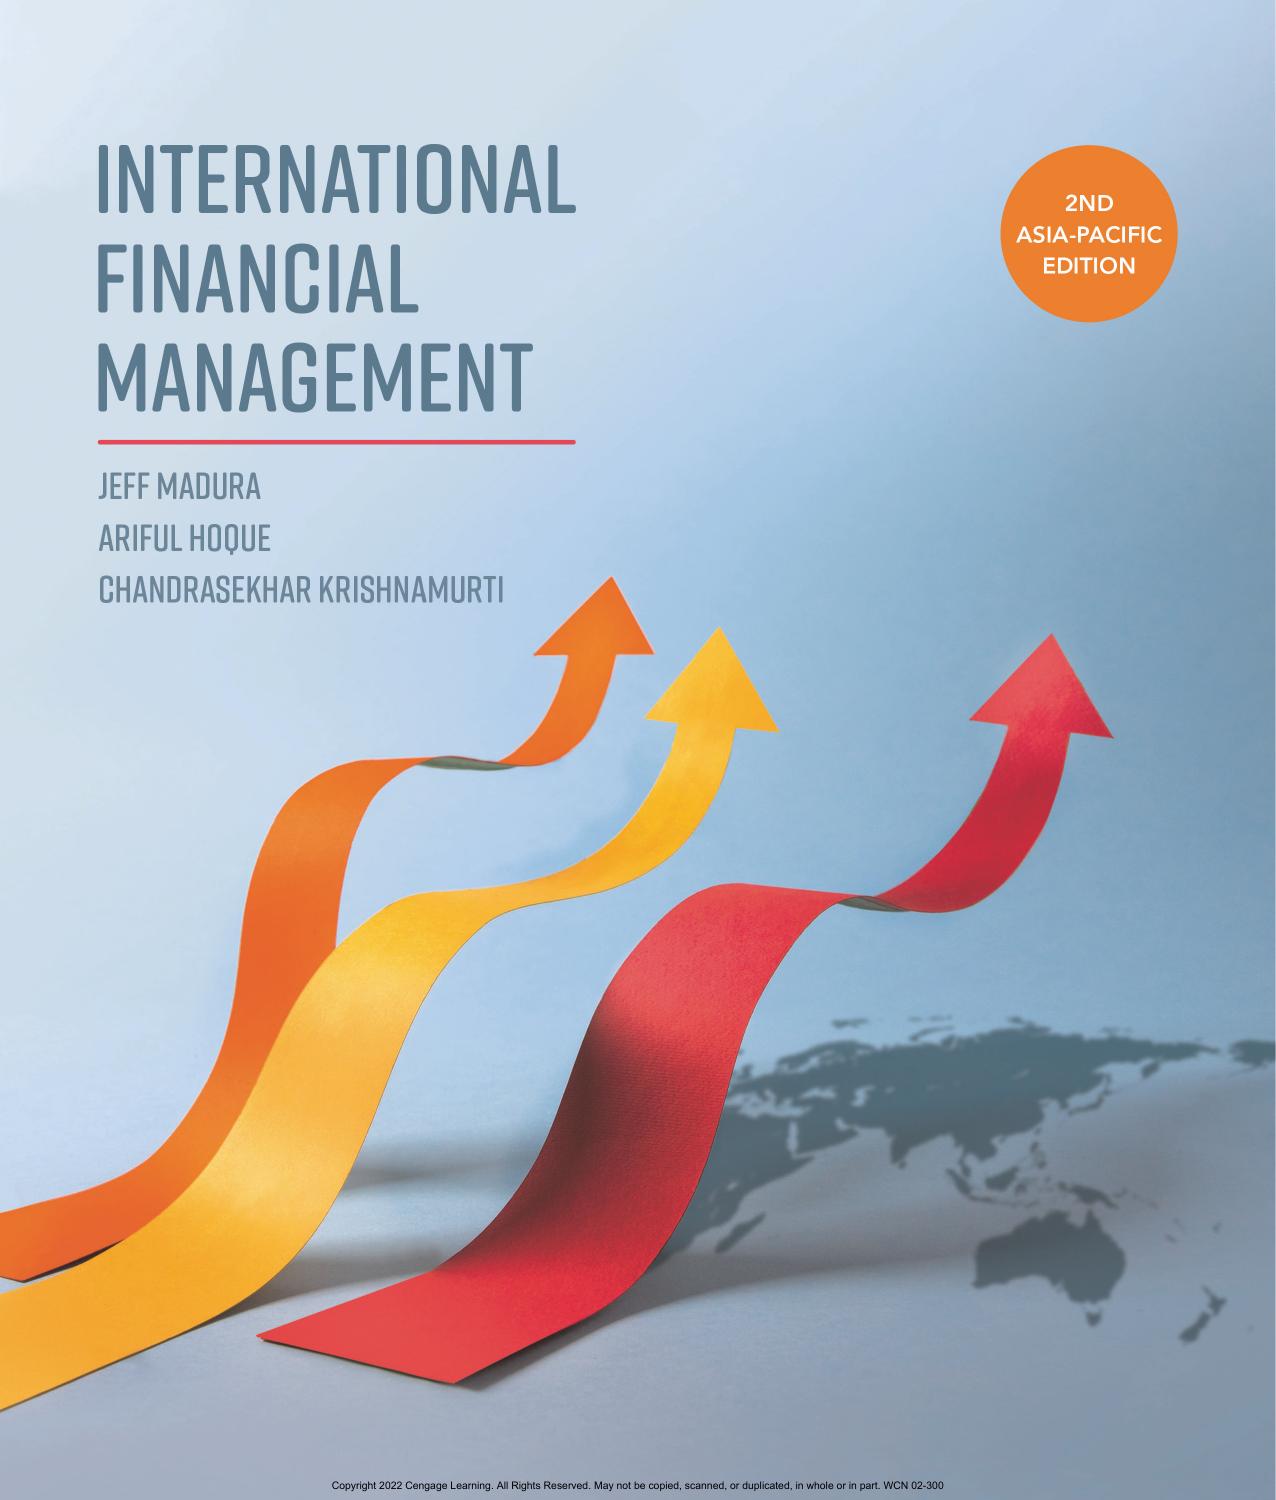 International Financial Management, 2nd Asia-Pacific Edition - SoftArchive